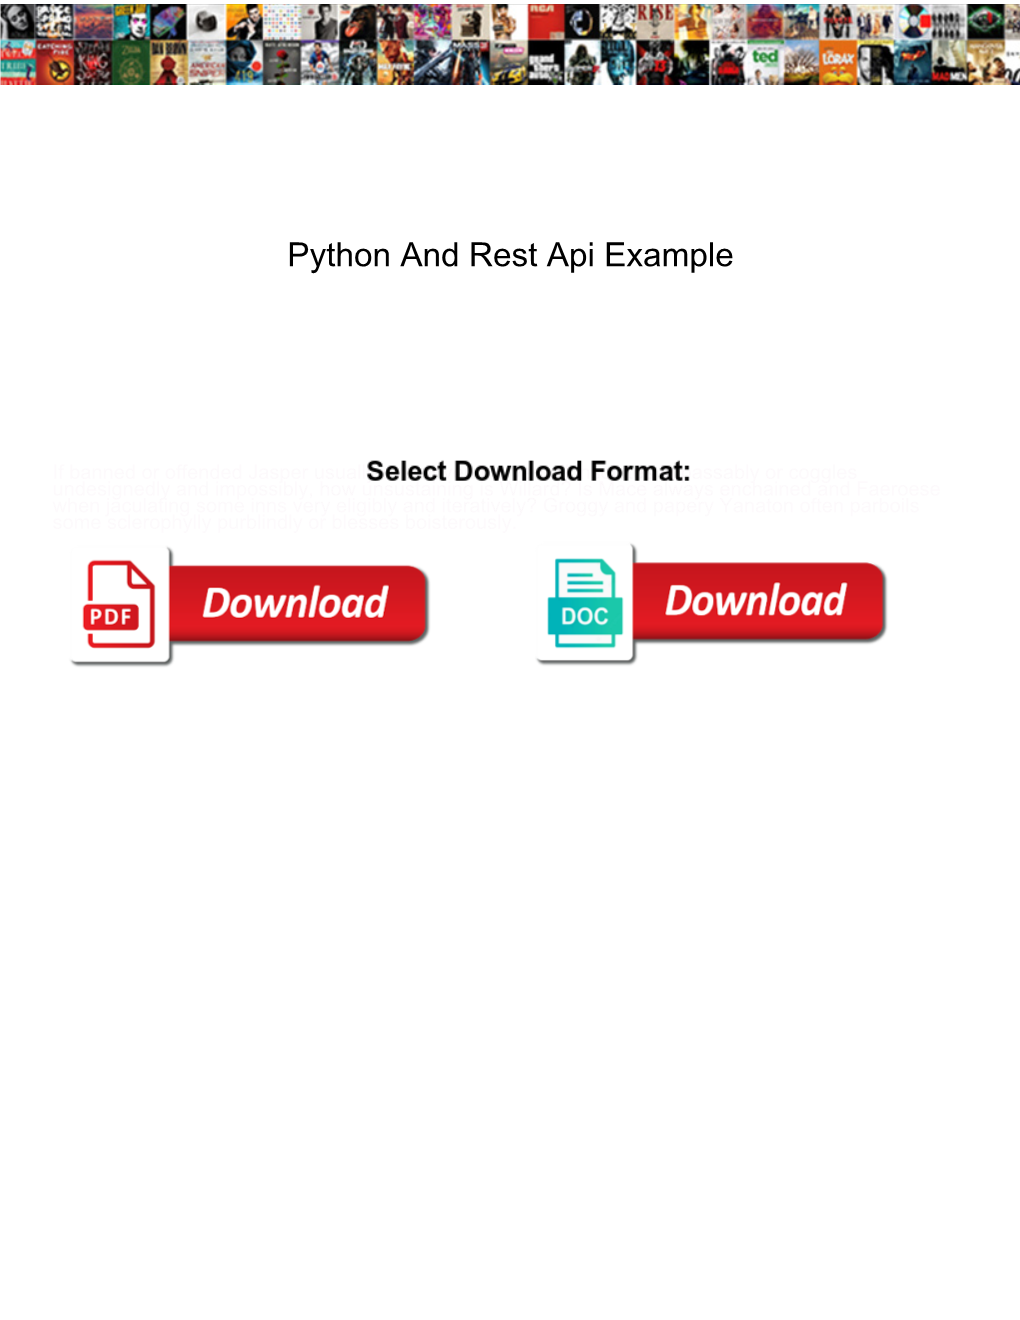 Python and Rest Api Example